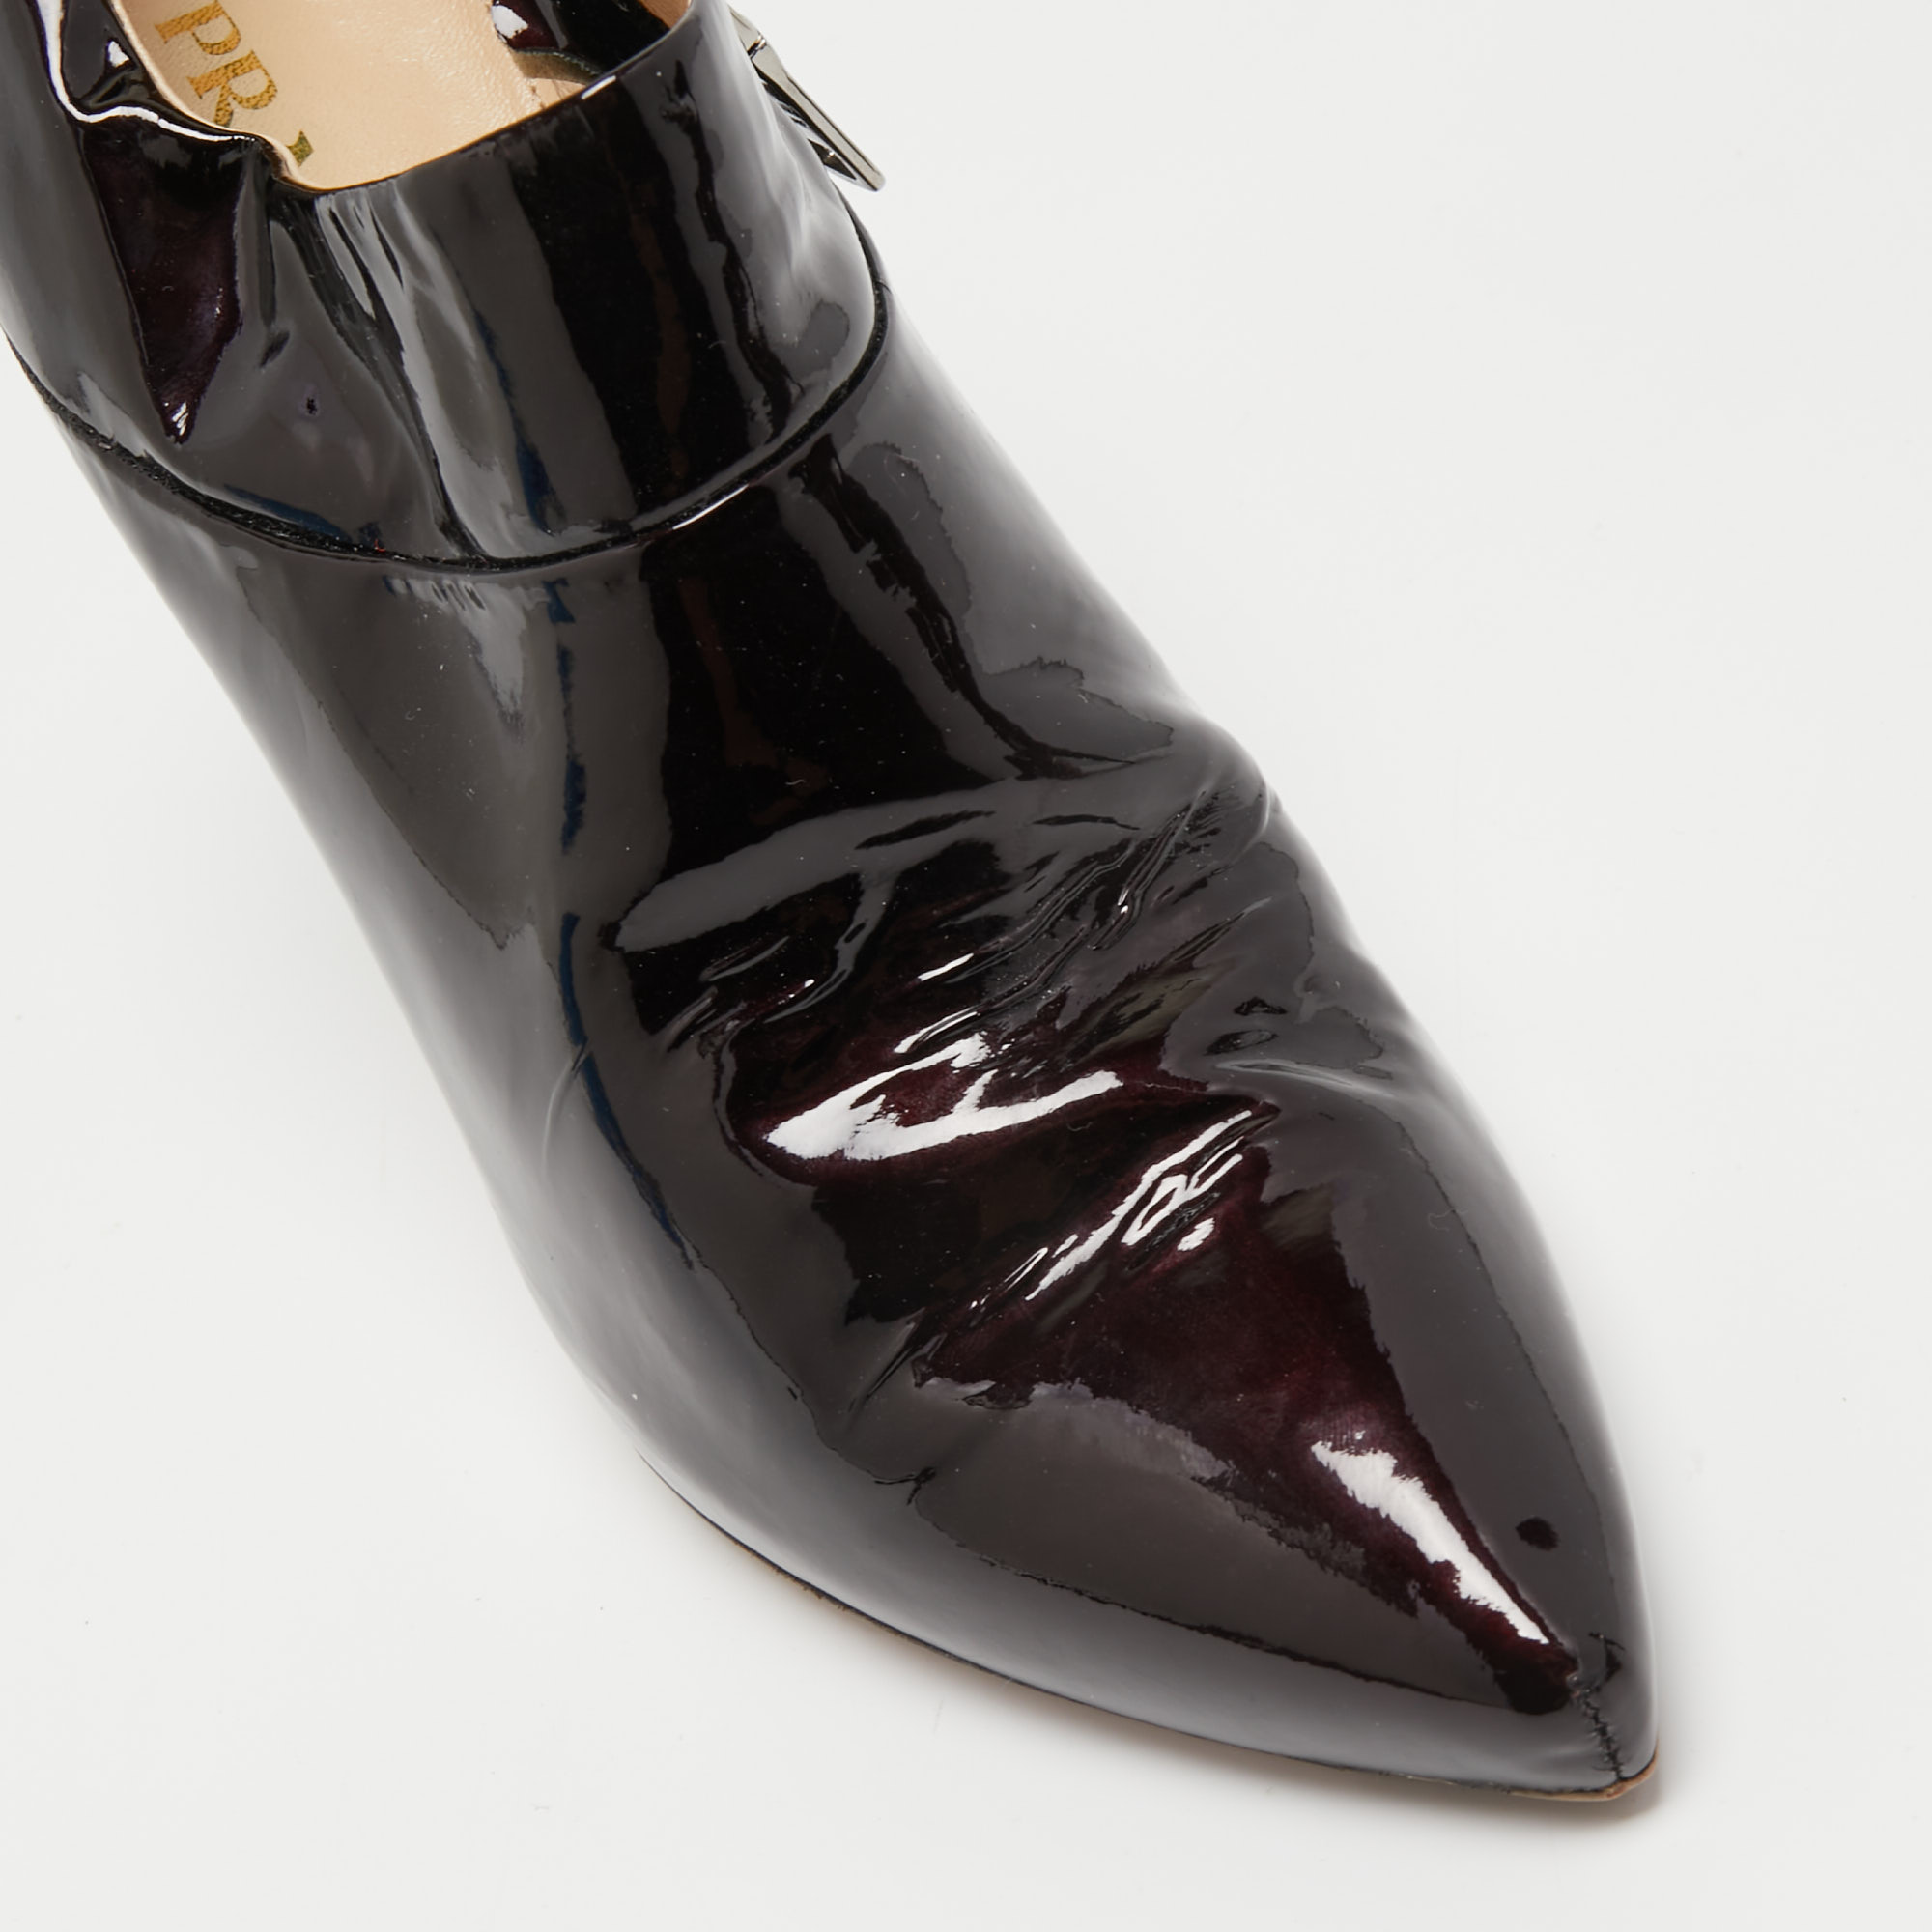 Prada Burgundy  Patent Leather Pointed Toe Booties  Size 39